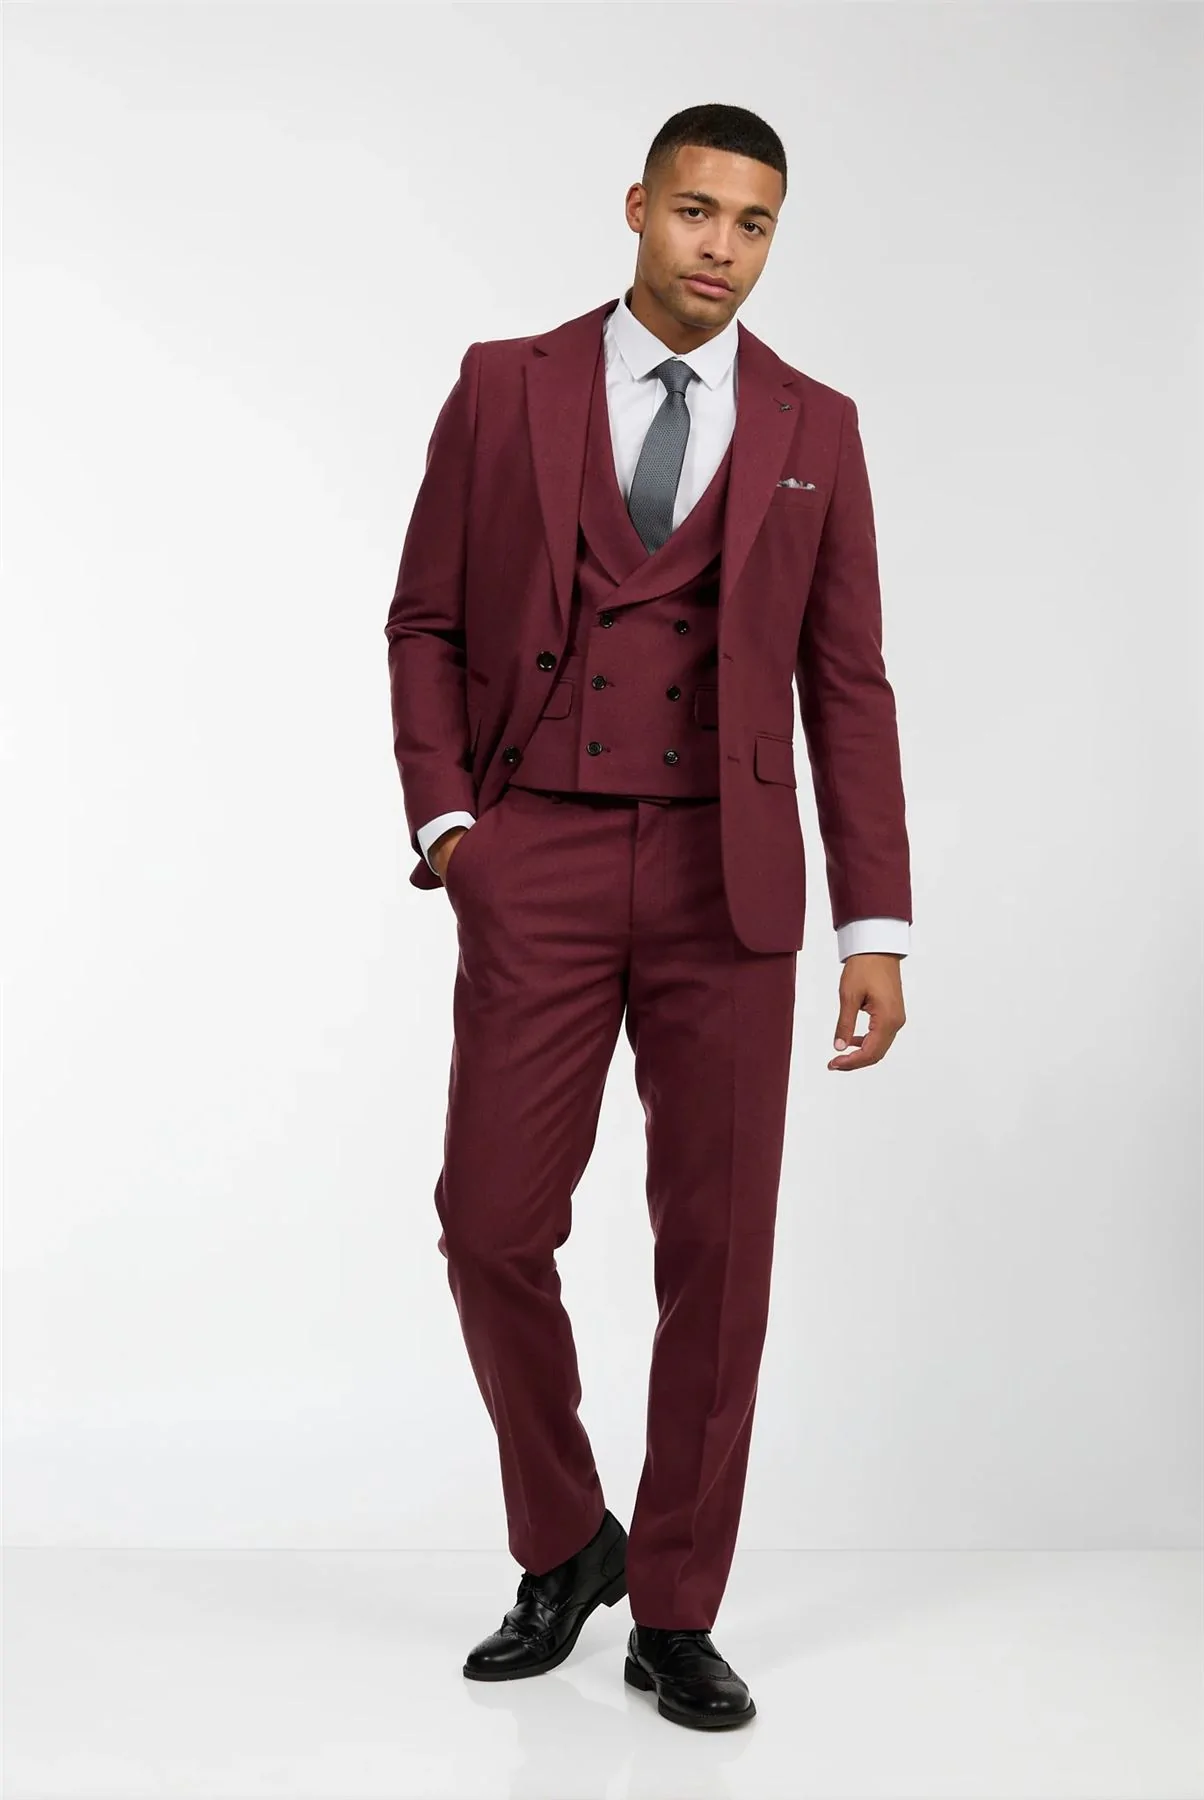 Classy Burgundy Two Piece Mens Suits with Black Lapel – Ballbella